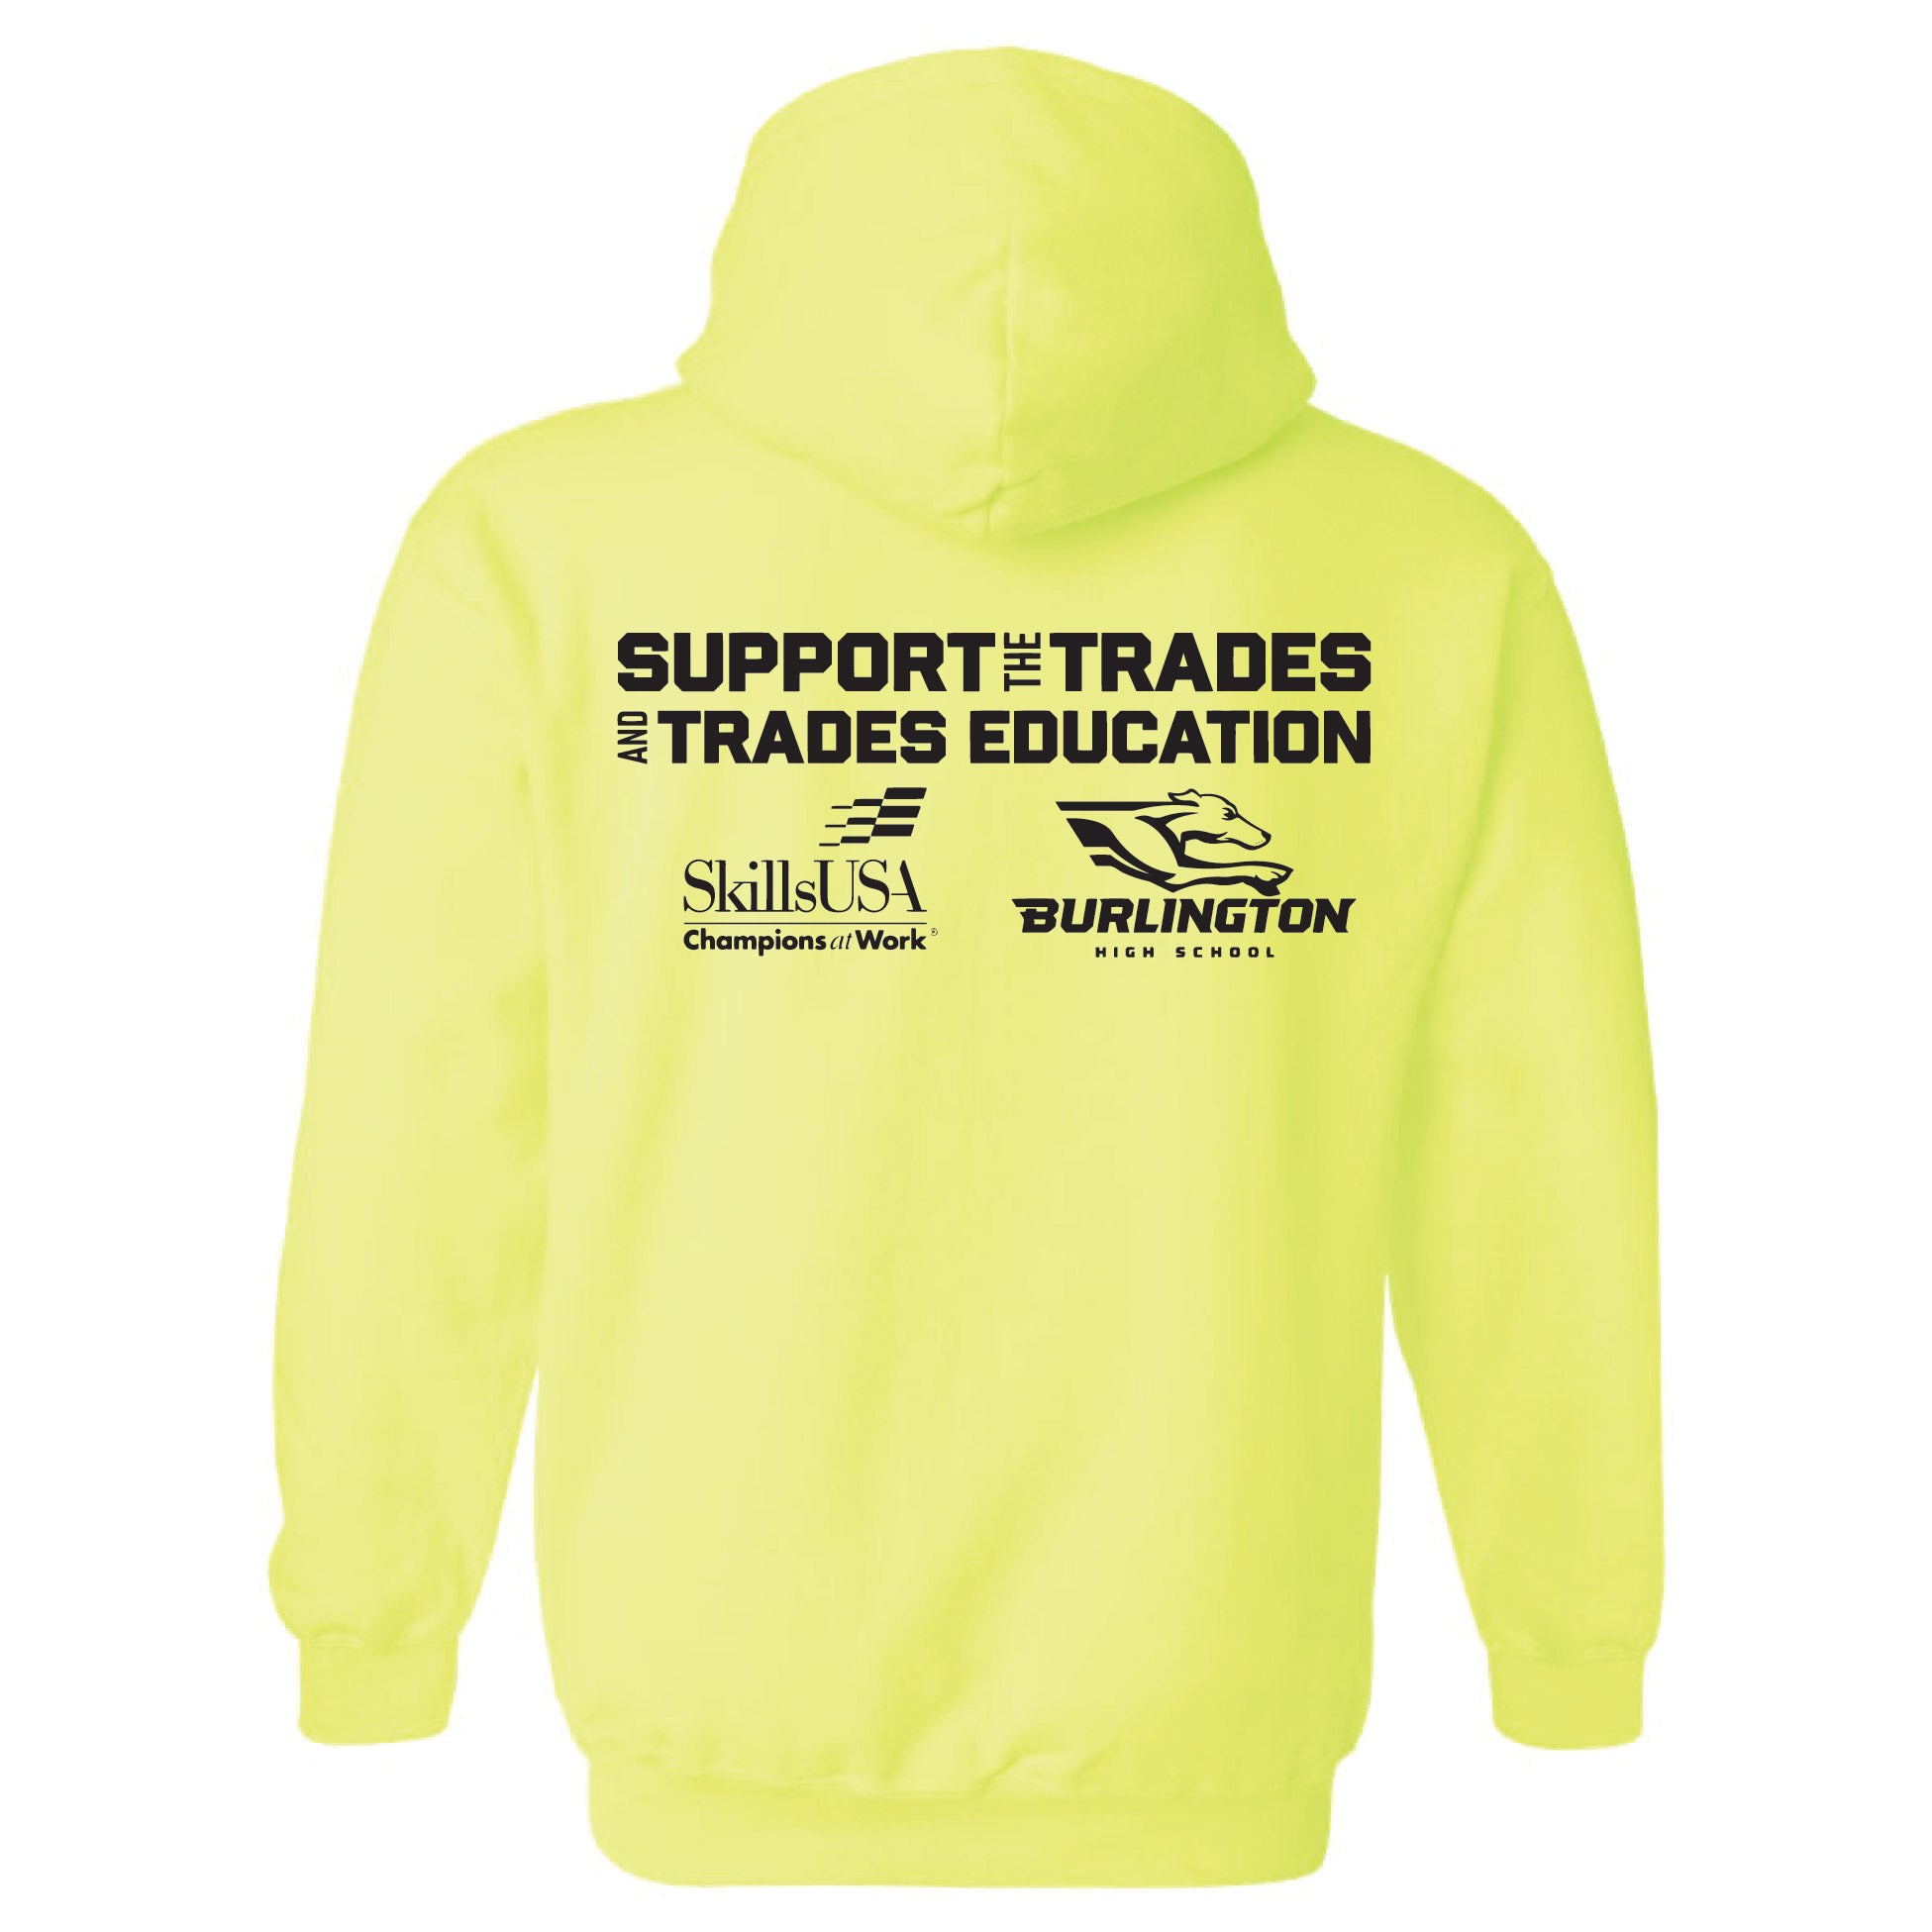 Burlington Support the Trades Hoodie